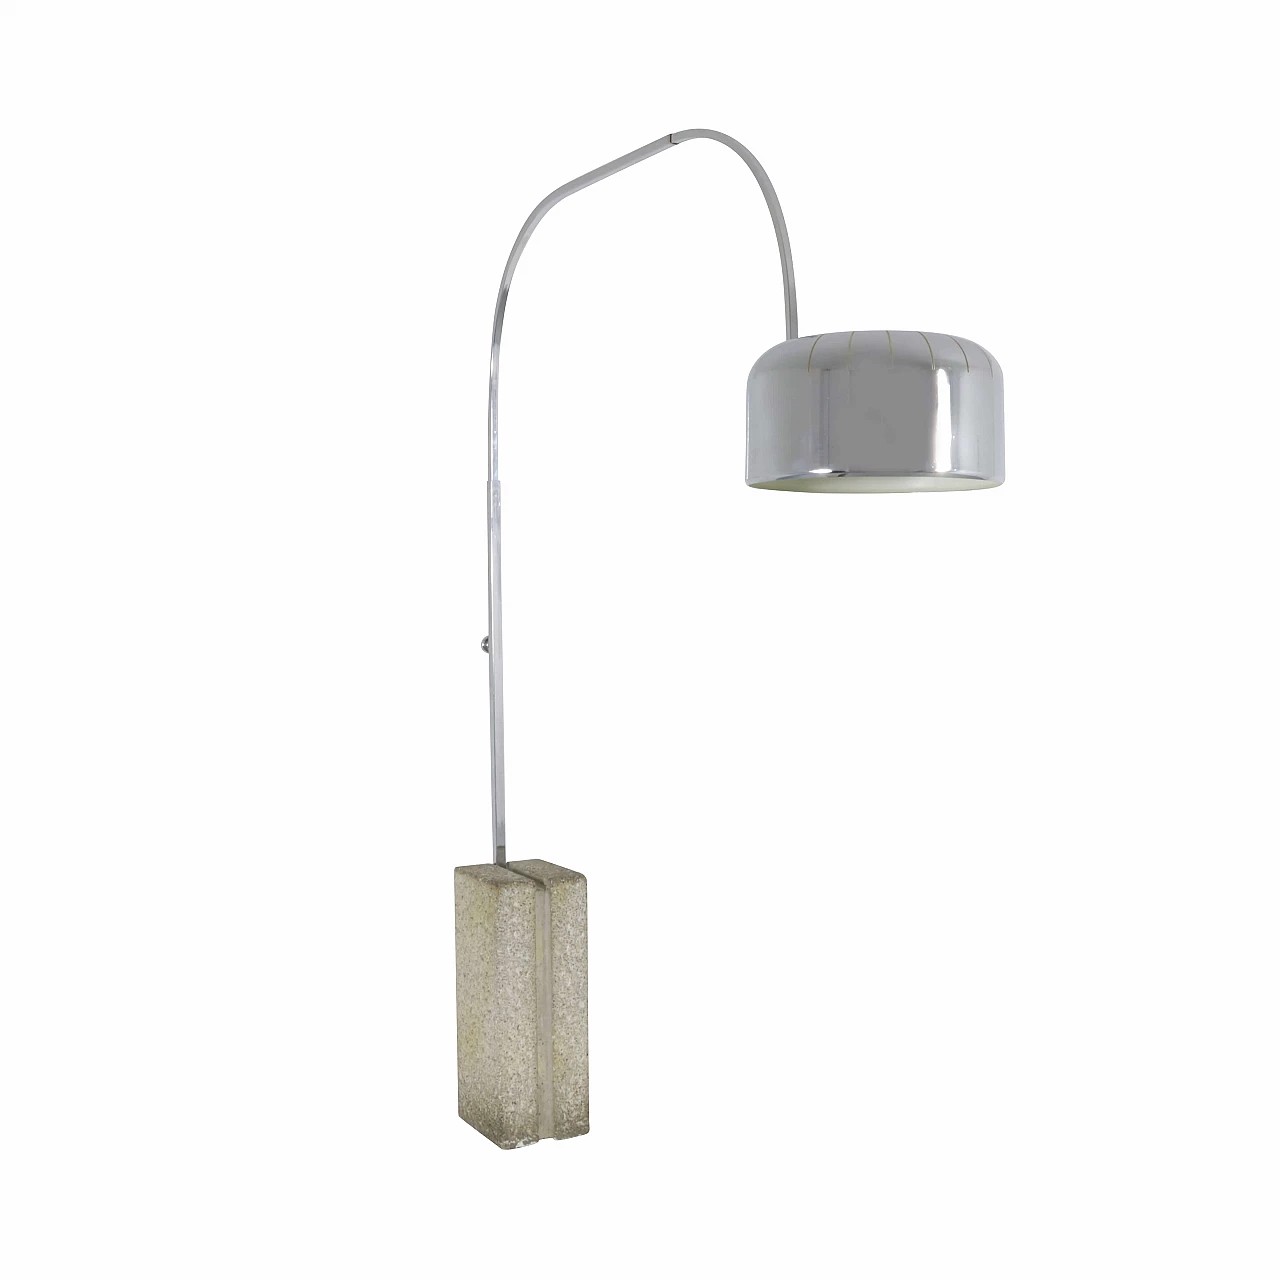 Arc lamp in steel with concrete base, 1960s 1270345